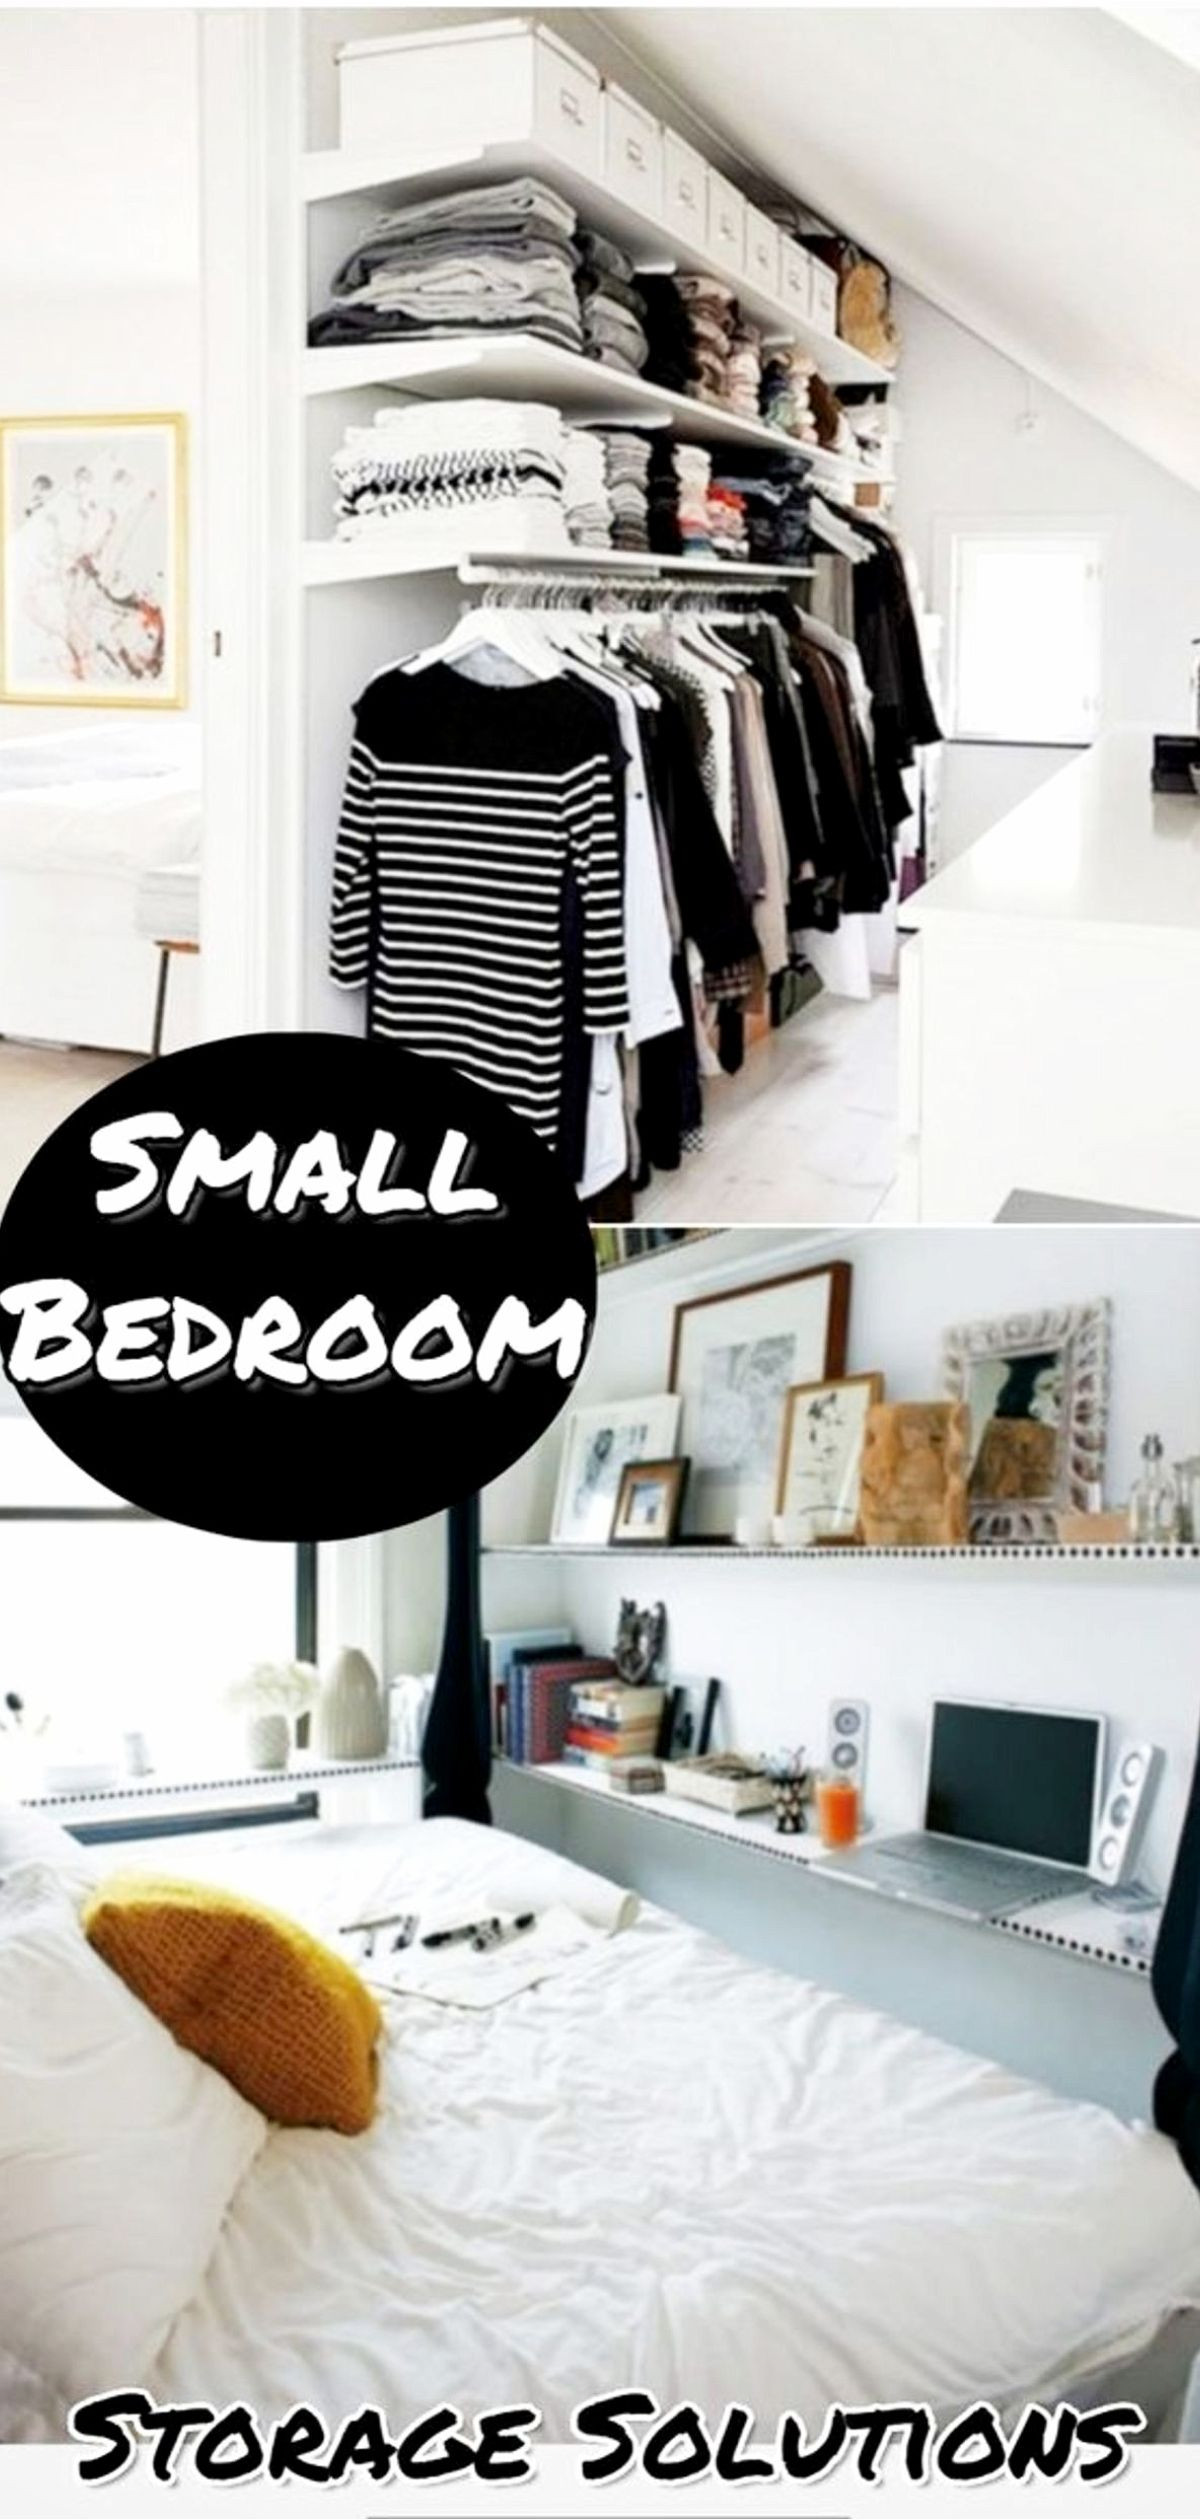 DIY Organization Ideas For Bedrooms
 38 Creative Storage Solutions for Small Spaces Awesome